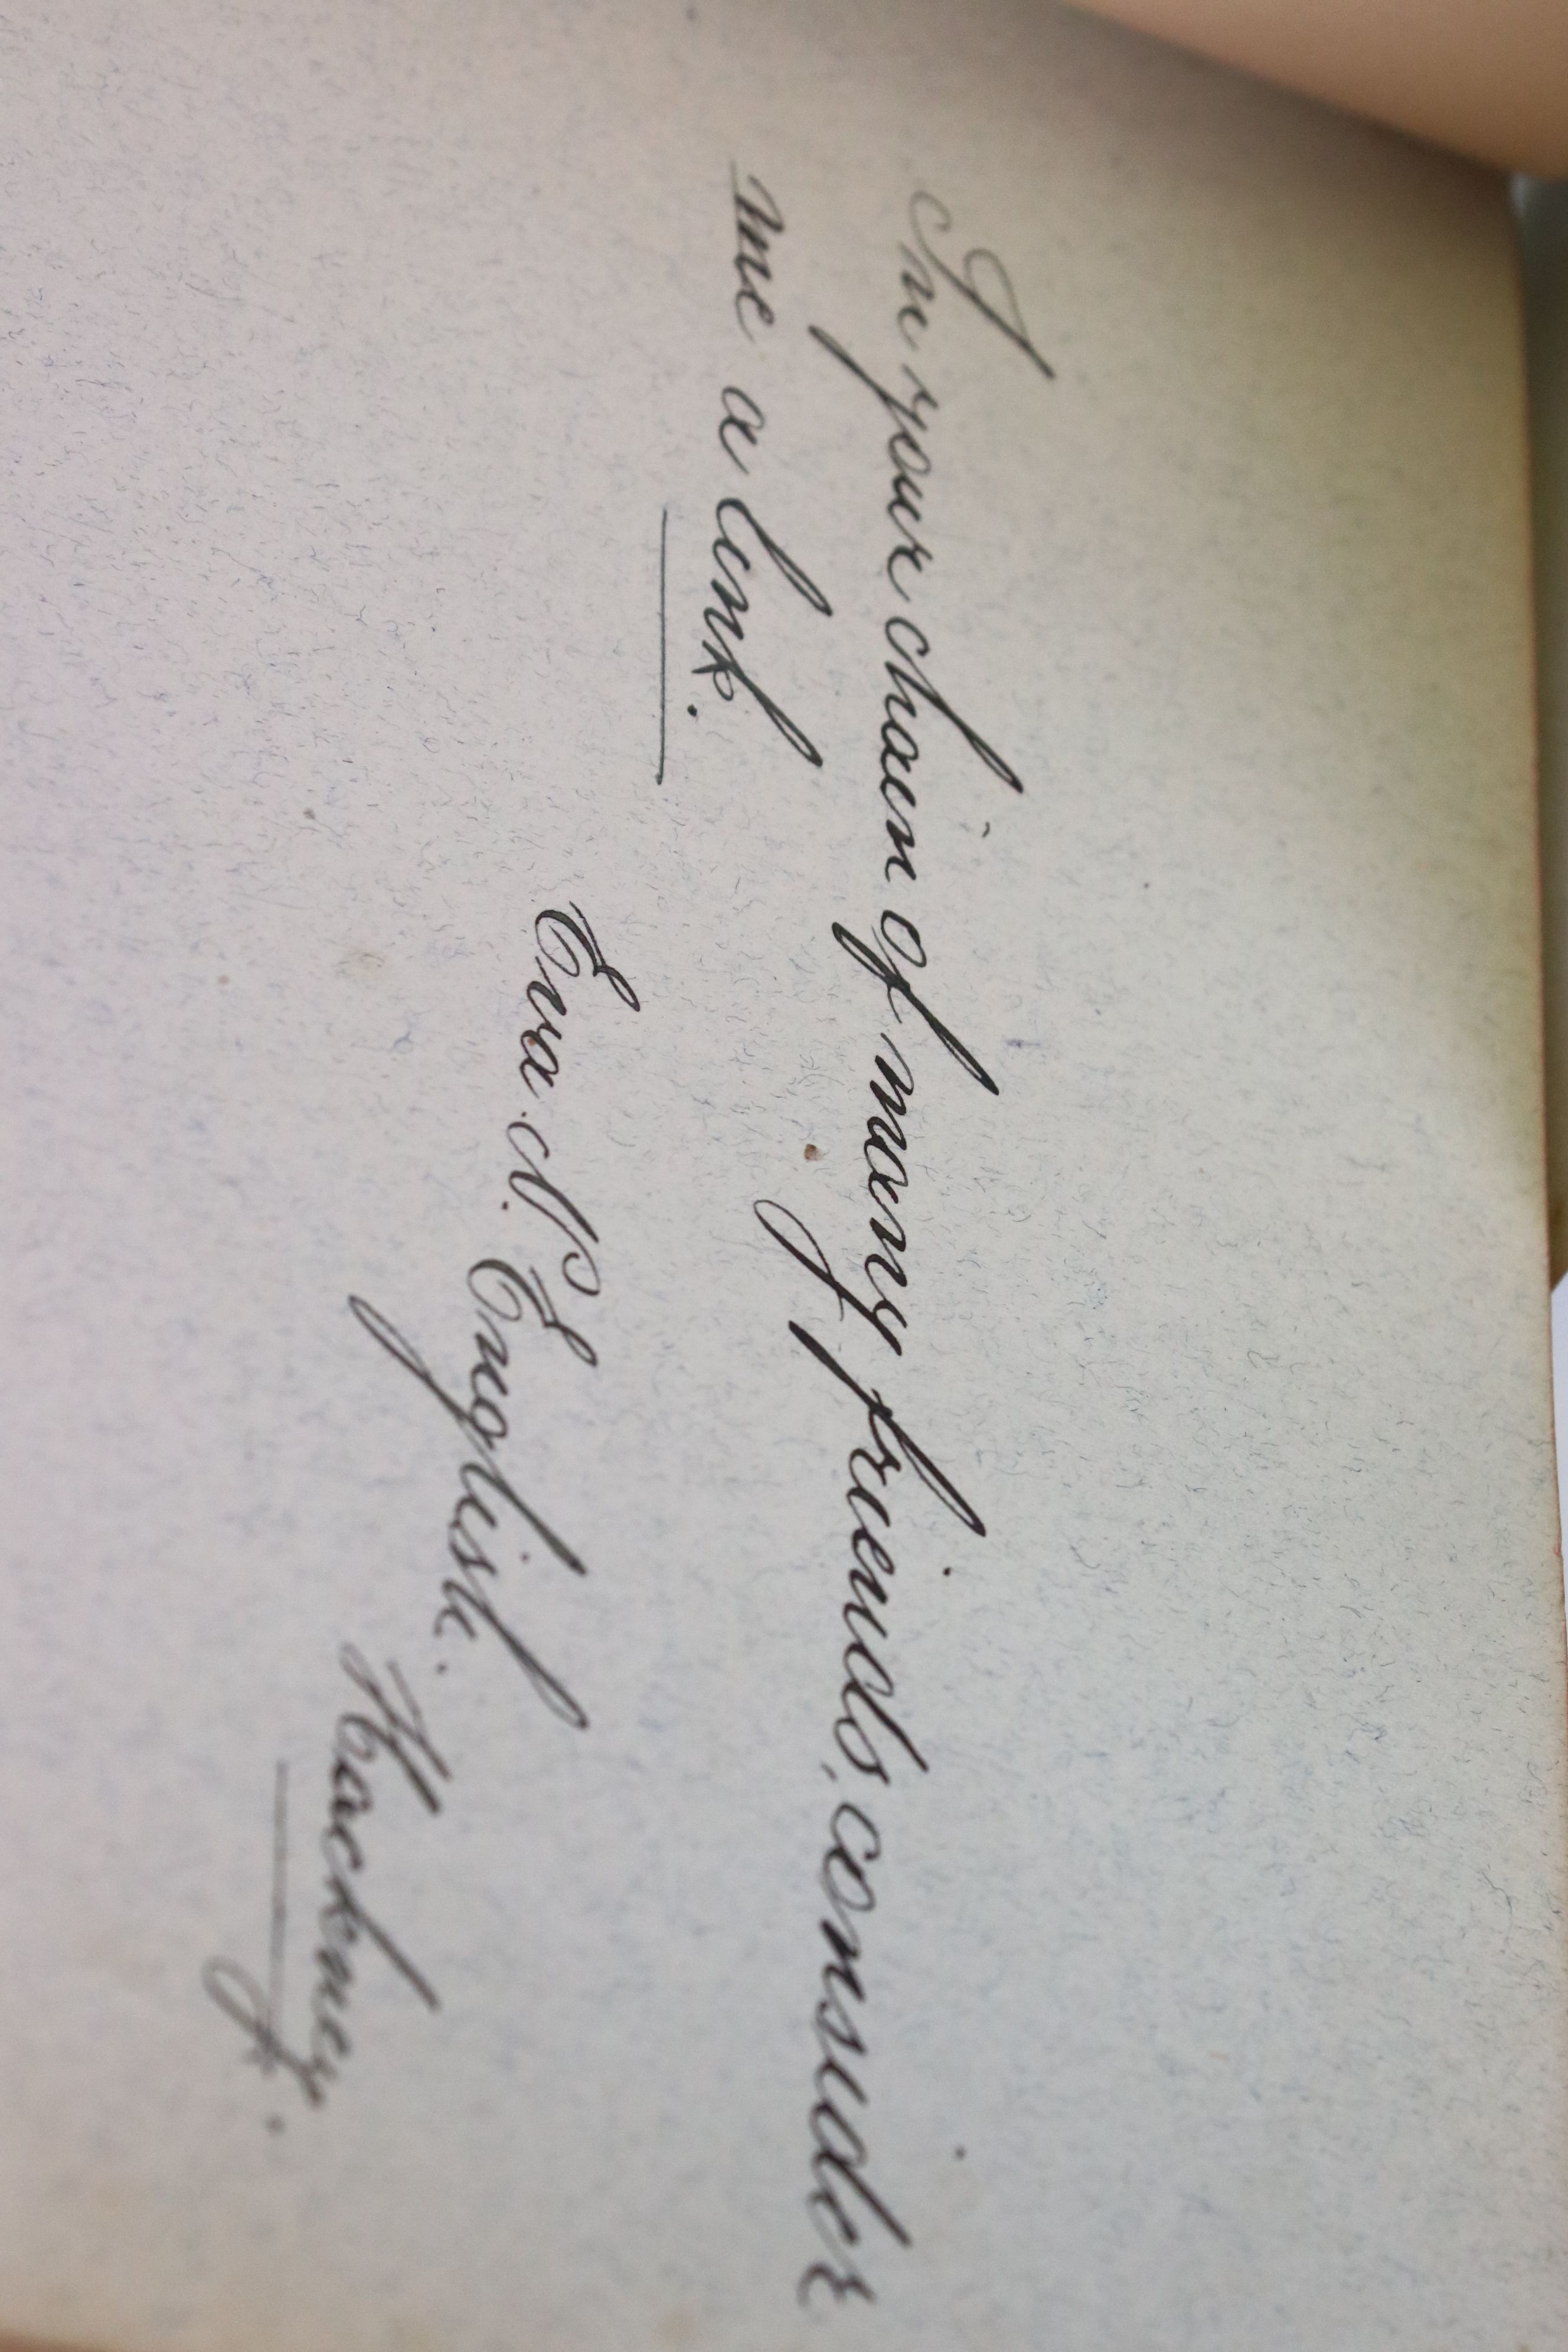 Victorian Sketchbook / Album belonging to Ann Nunney containing mainly verses dating from 1879 - Image 8 of 17